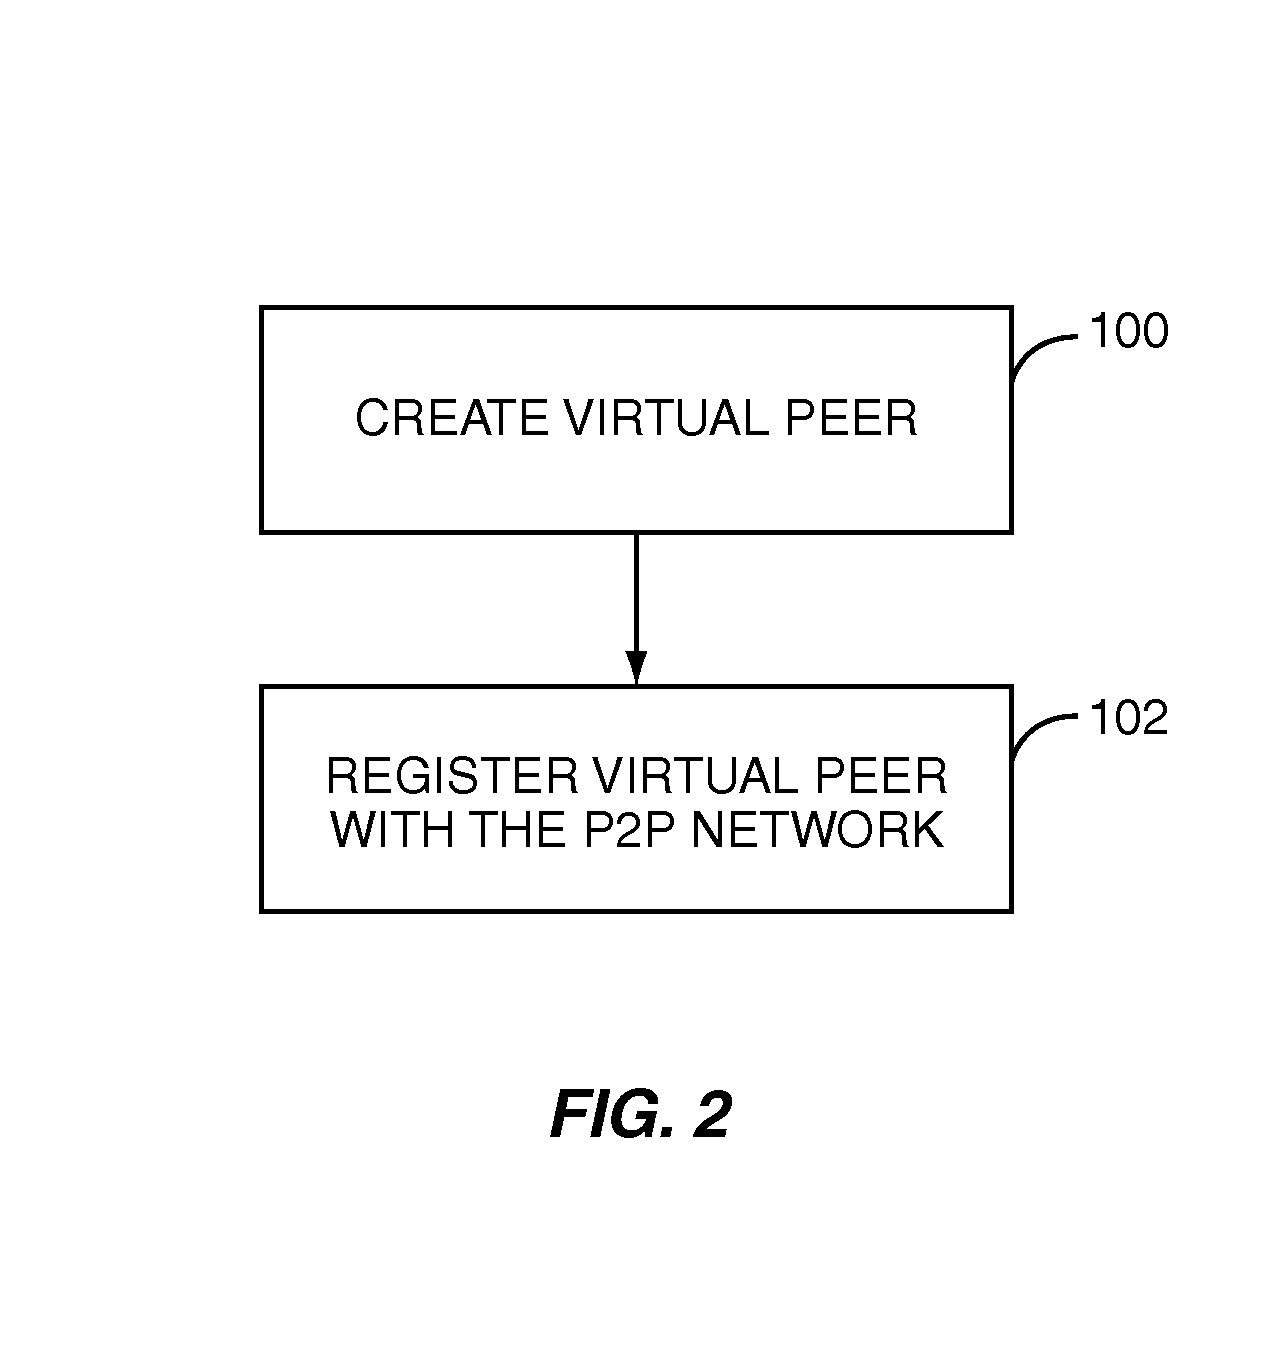 Virtual peer for a content sharing system